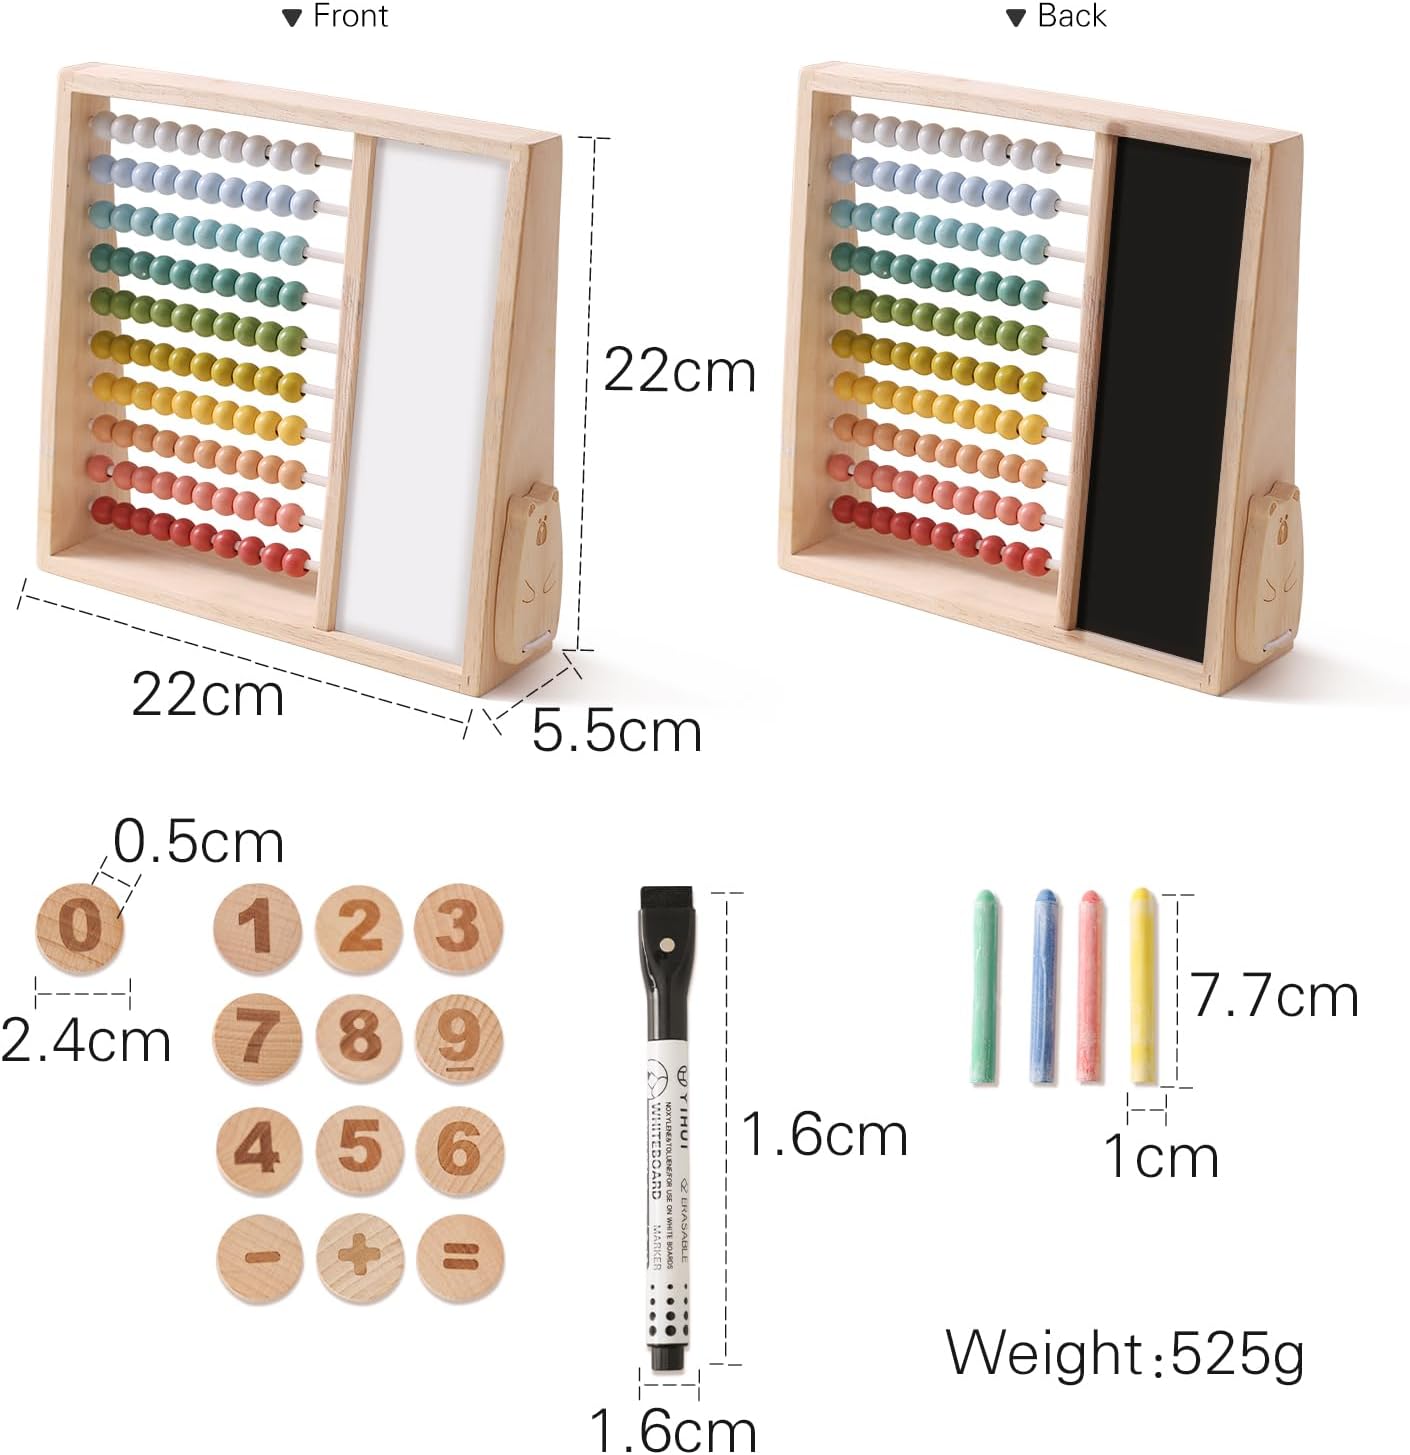 Wooden Abacus Beads Counting Toys